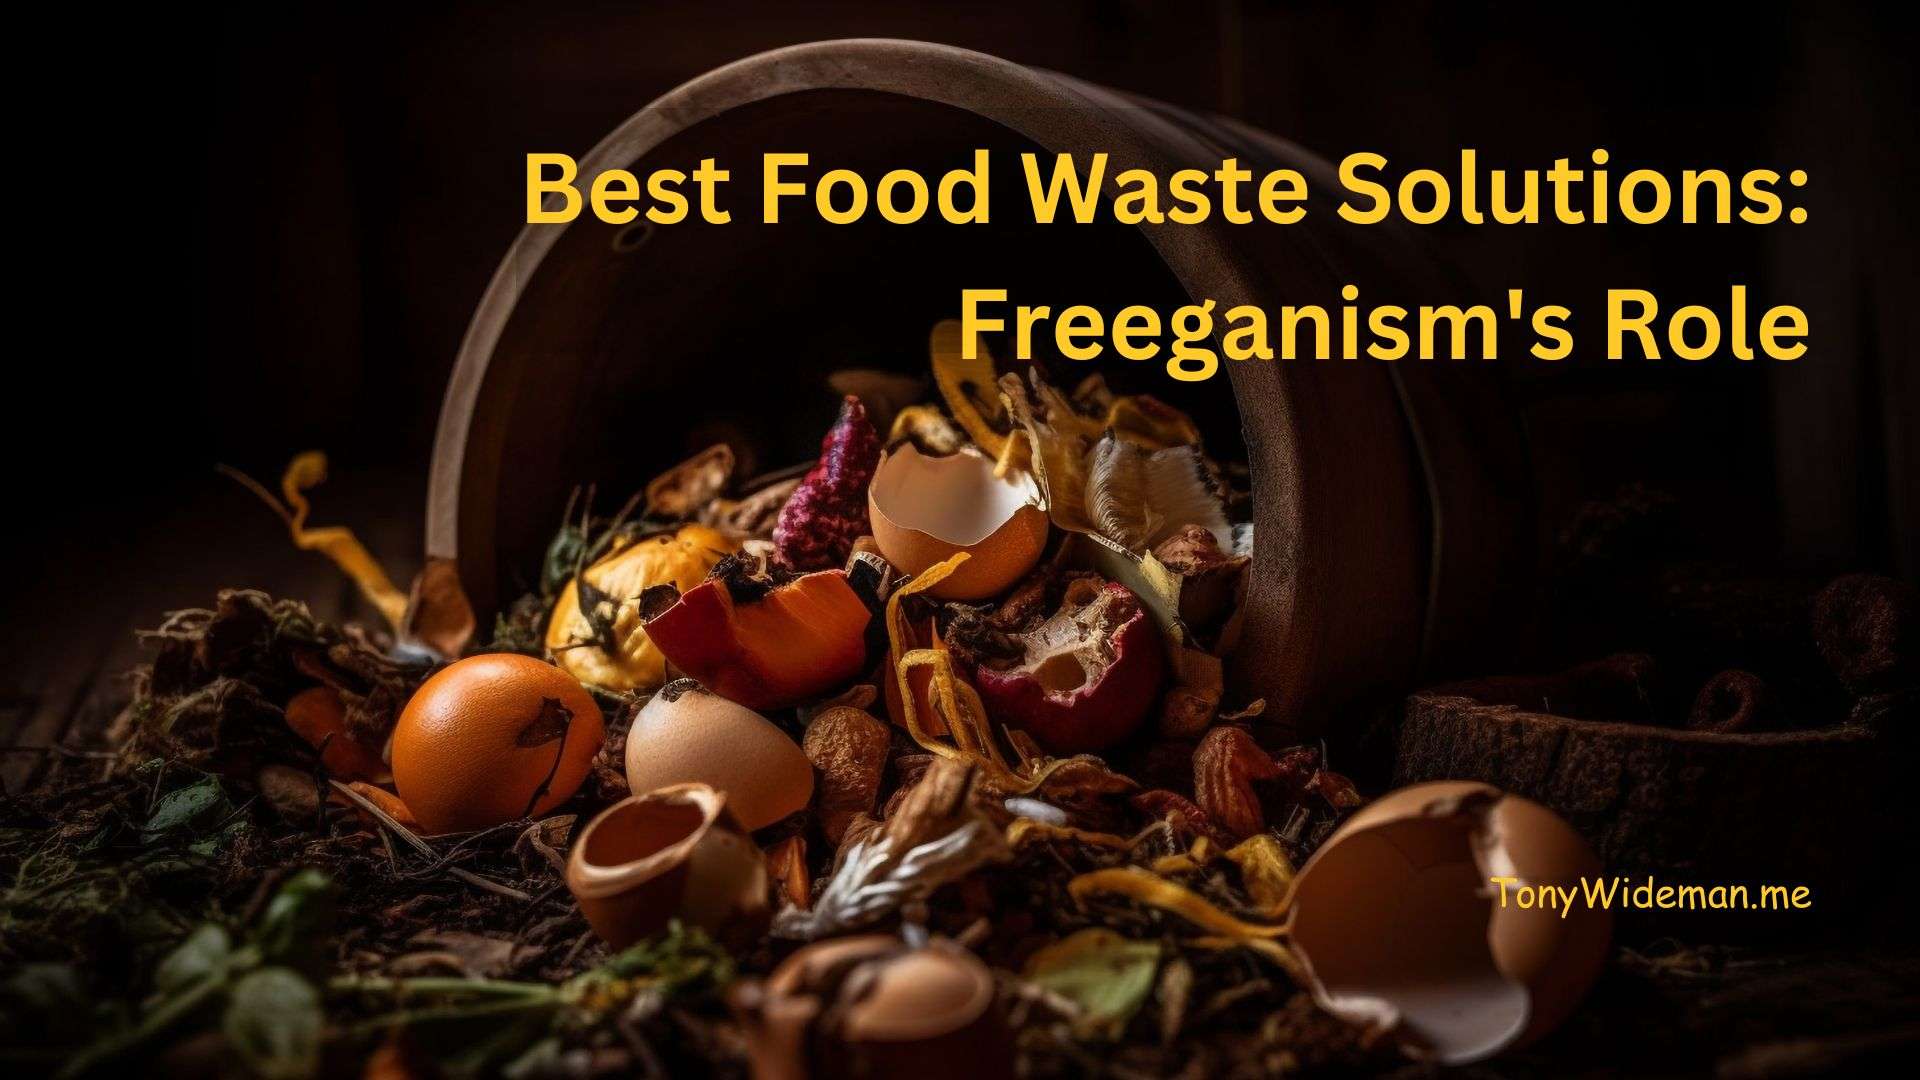 Best Food Waste Solutions: Freeganism's Role